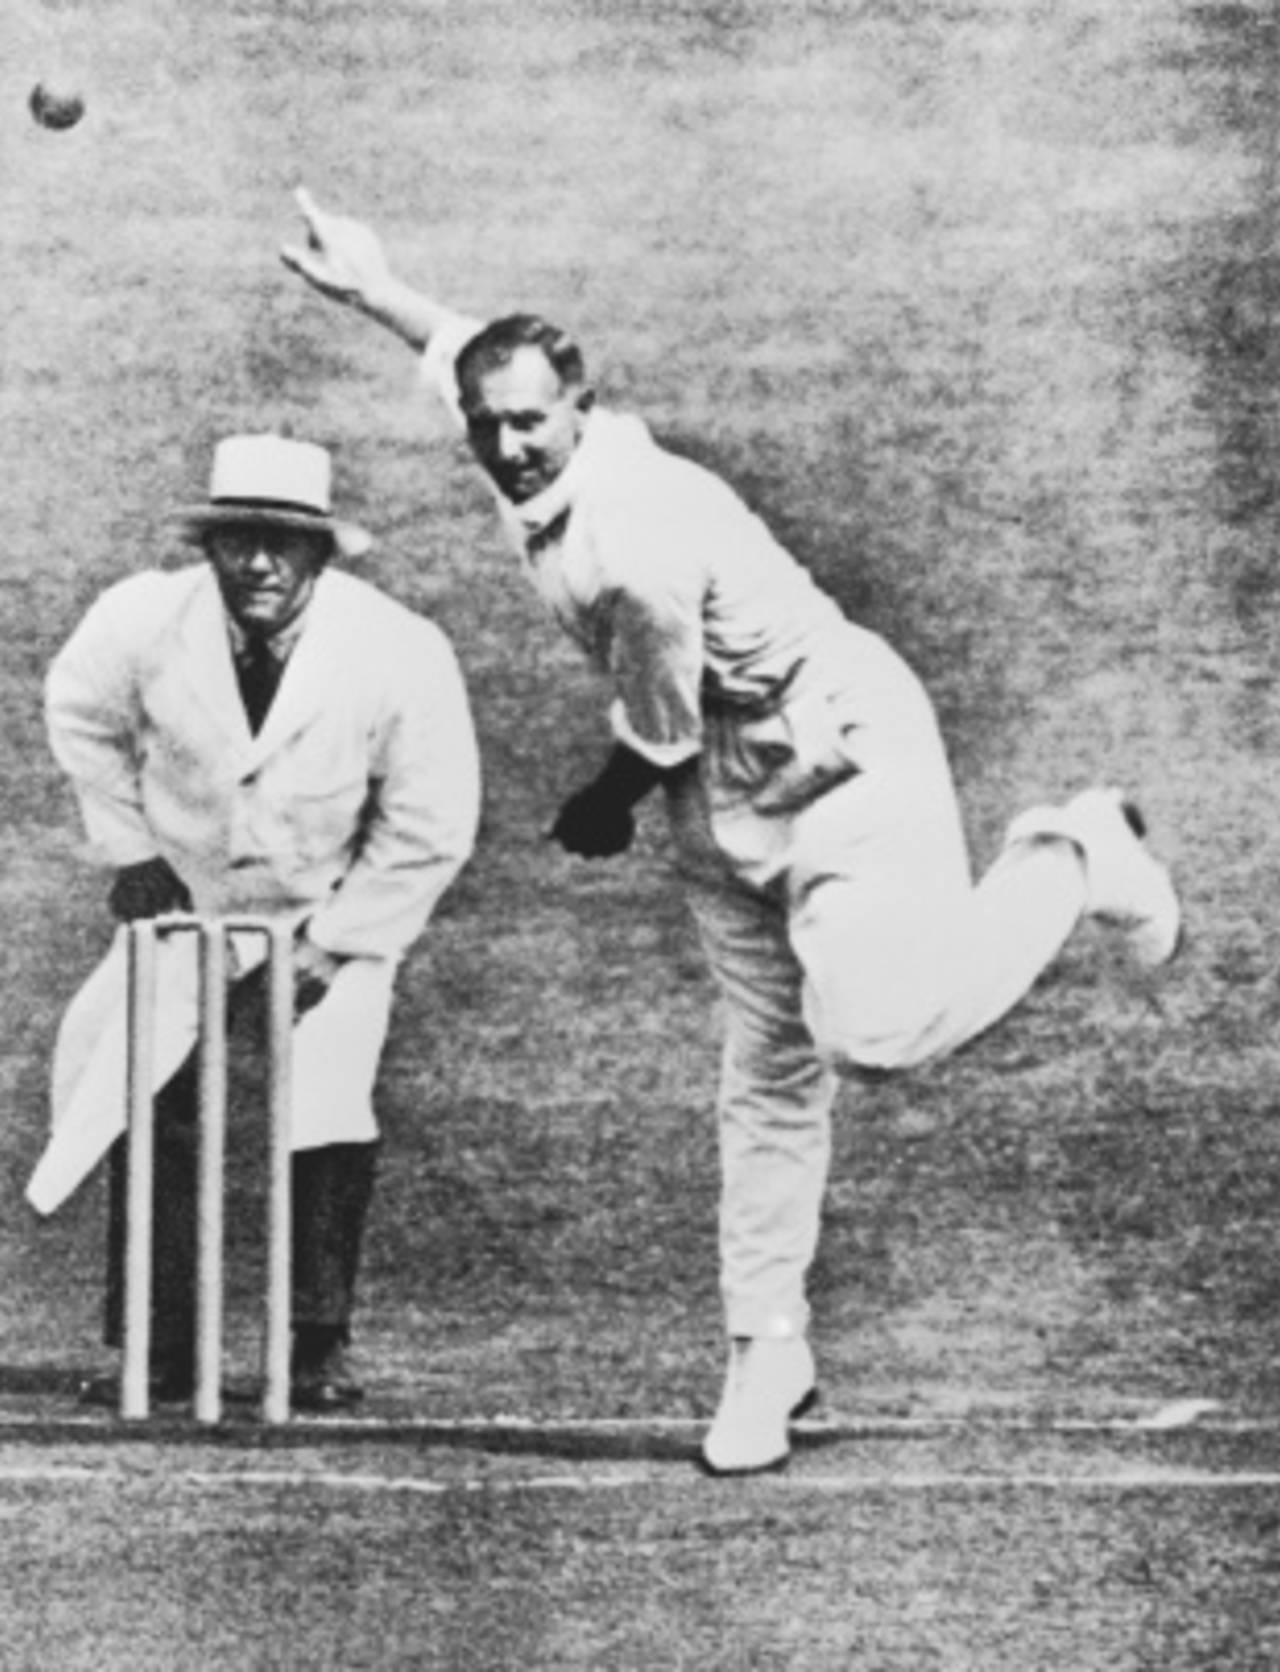 Hedley Verity tosses the ball, 1940